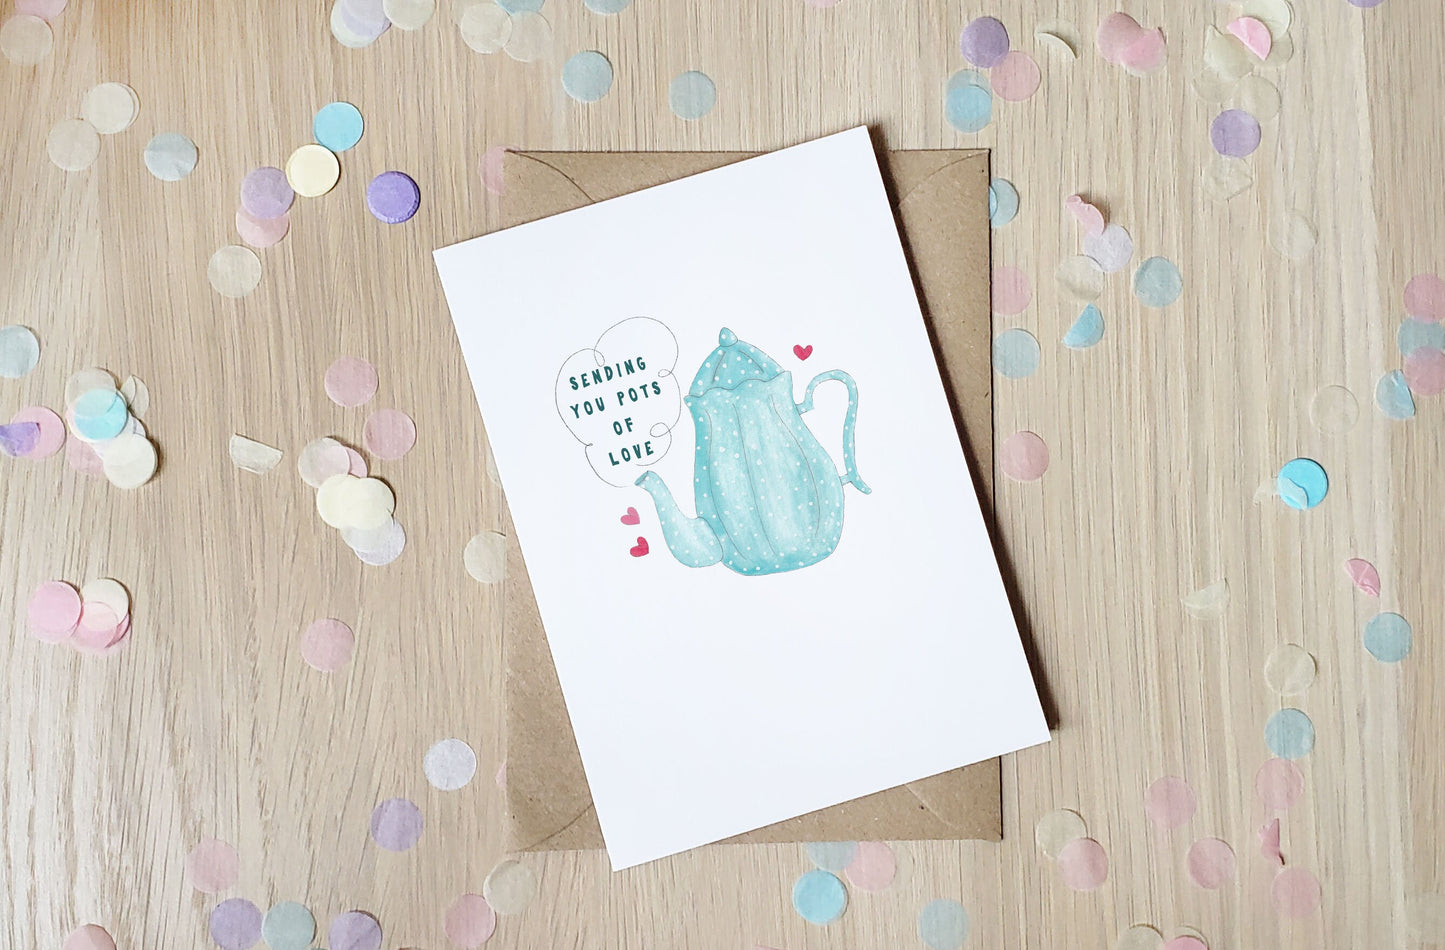 Sending you Pots of Love  - Greeting Card